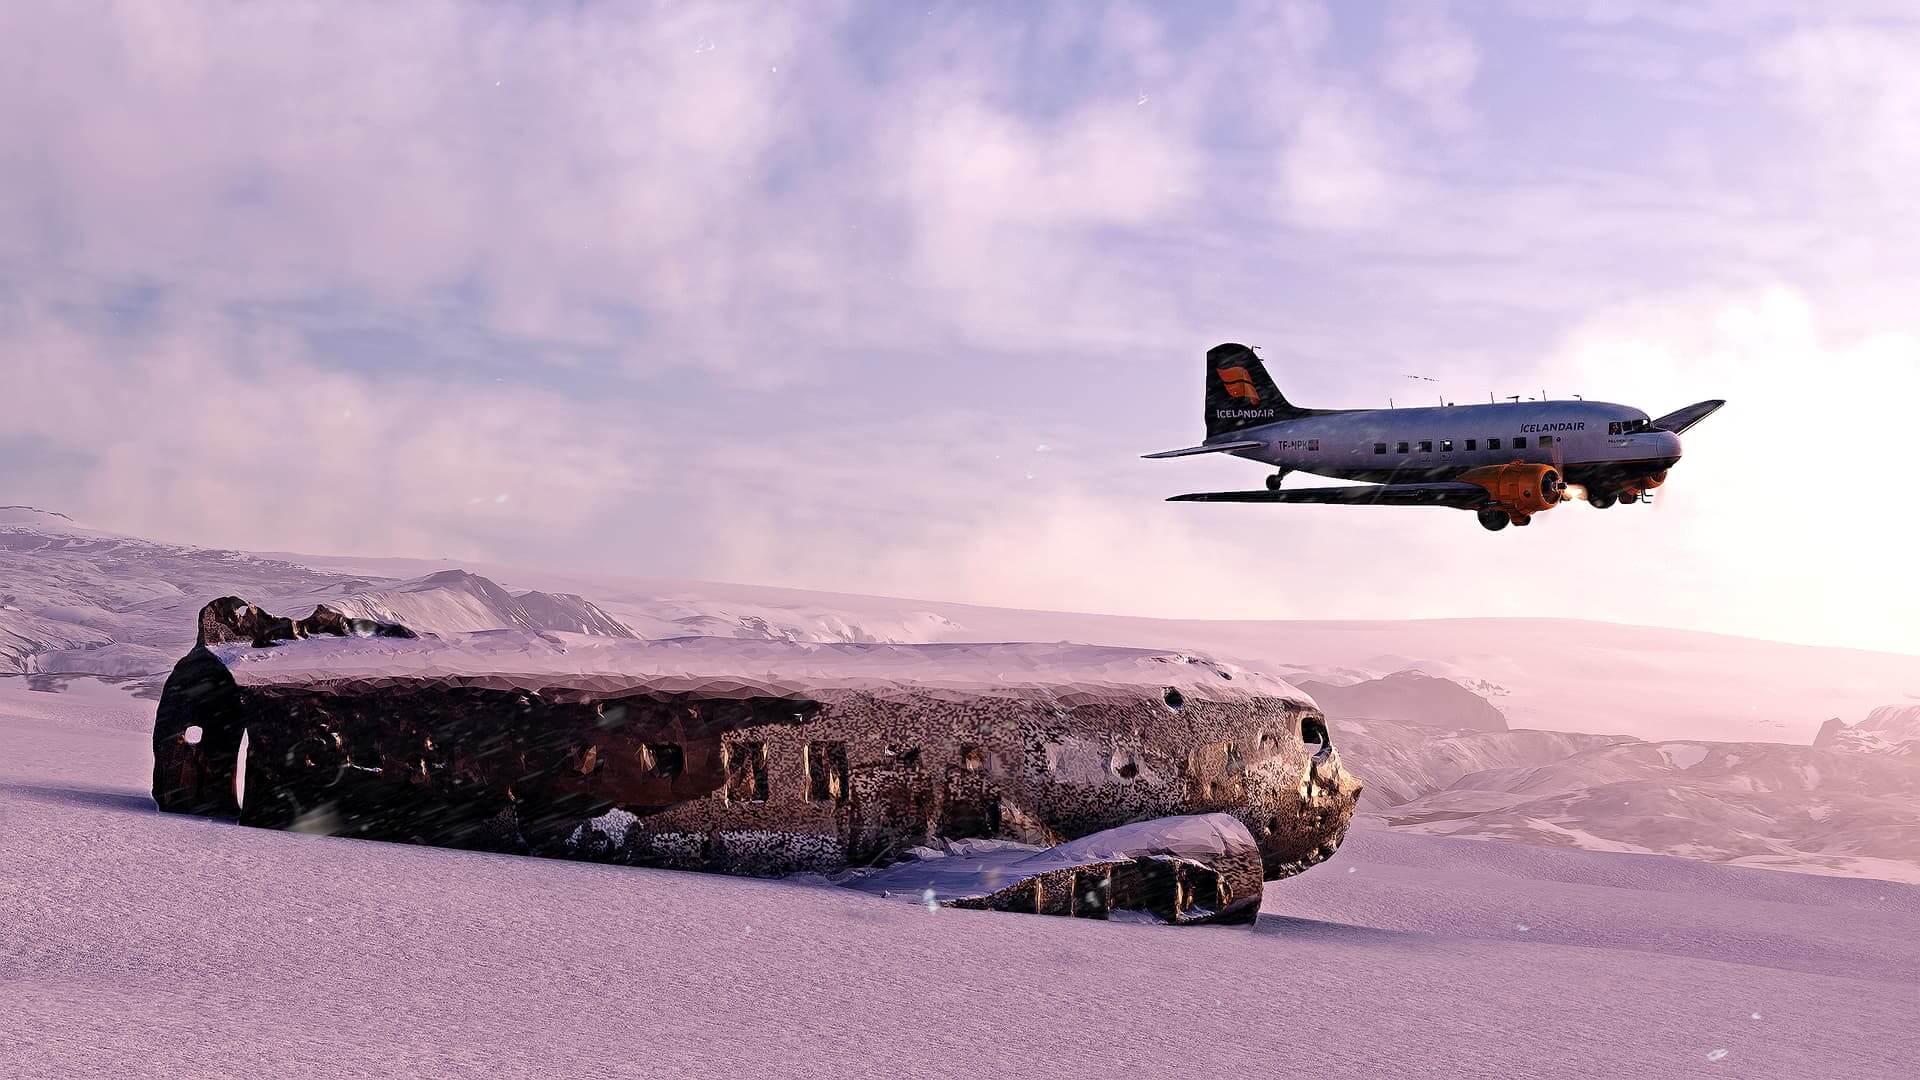 An Icelandair Dc-3 passes over a plane wreckage covered in ice and snow.